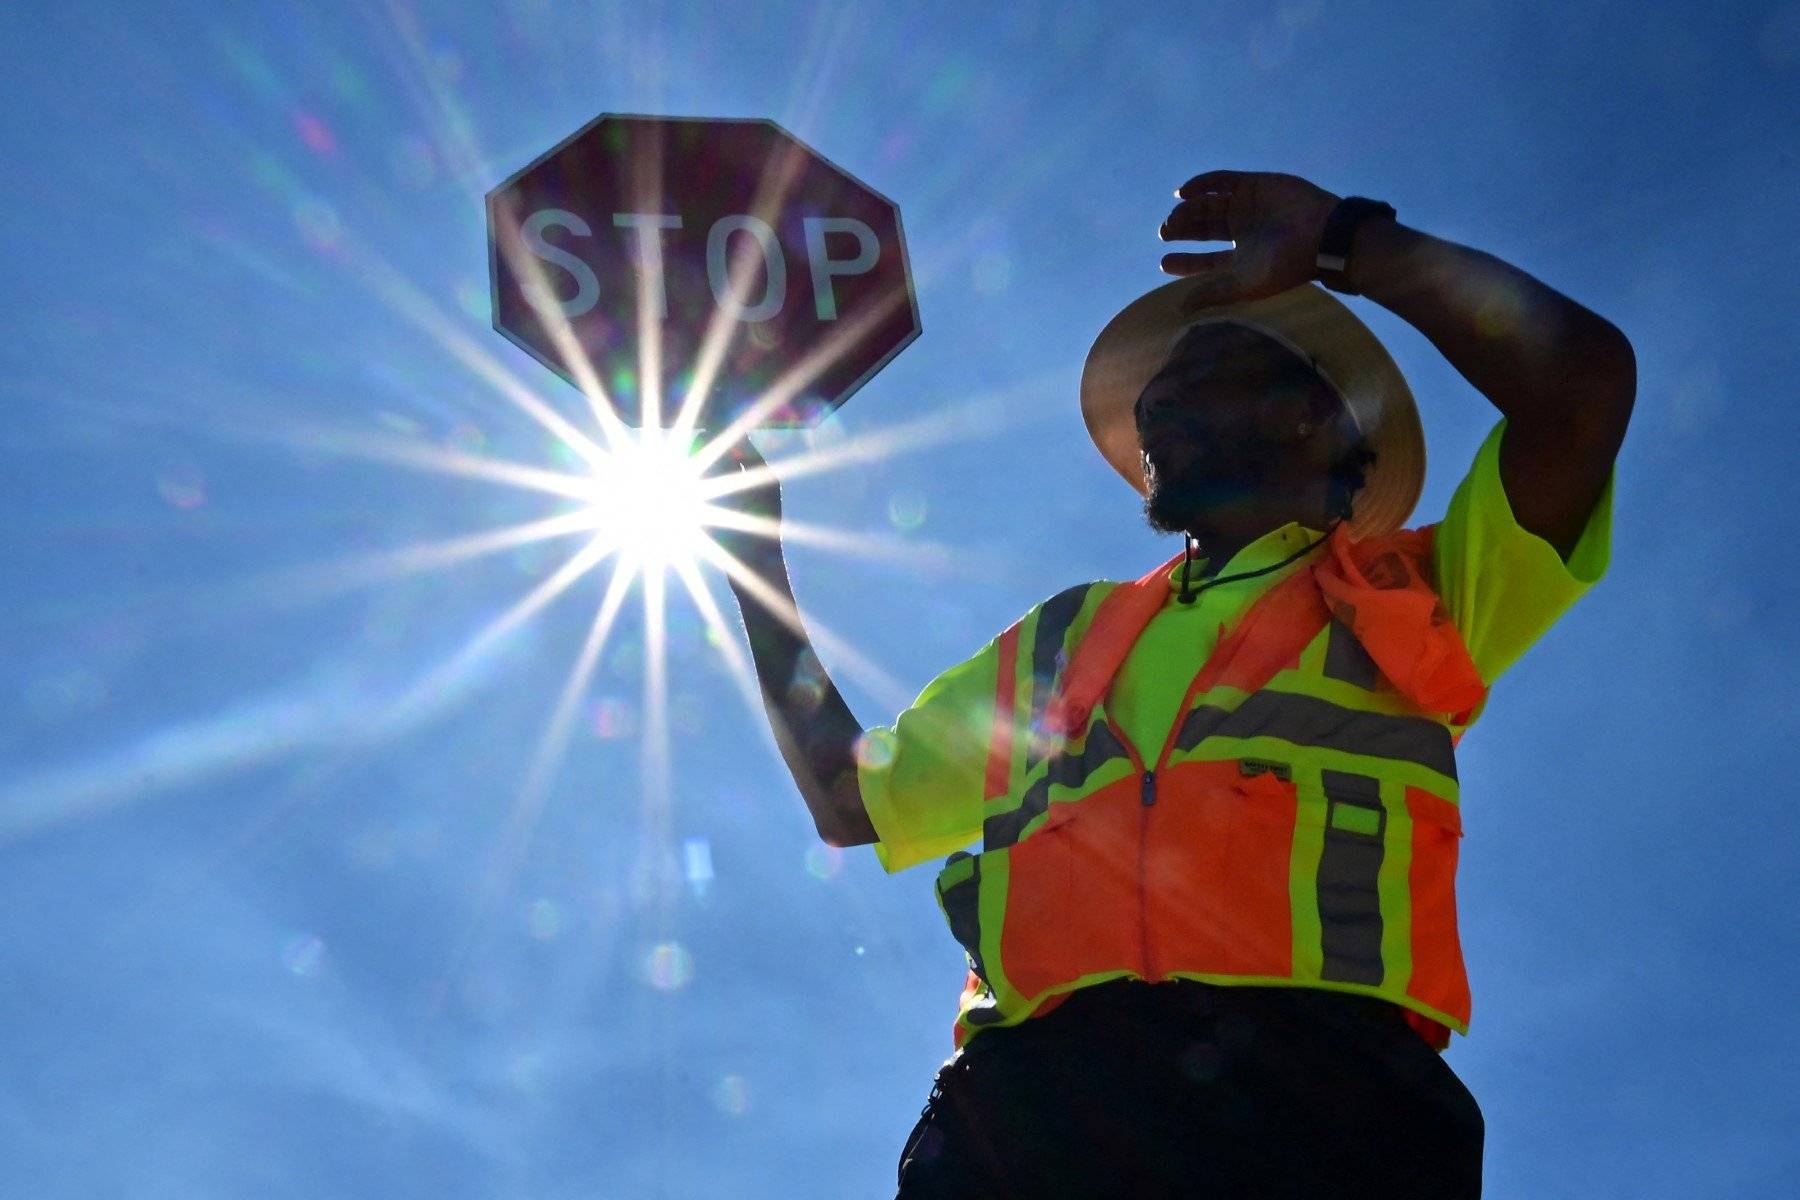 Traffic warden Rai Rogers mans his street corner during an 8-hour shift under the hot sun in Las Vegas, Nevada on July 12, 2023, where temperatures reached 106 degrees amid an ongoing heatwave. More than 50 million Americans are set to bake under dangerously high temperatures this week, from California to Texas to Florida, as a heat wave builds across the southern United States. (Photo by Frederic J. BROWN / AFP)